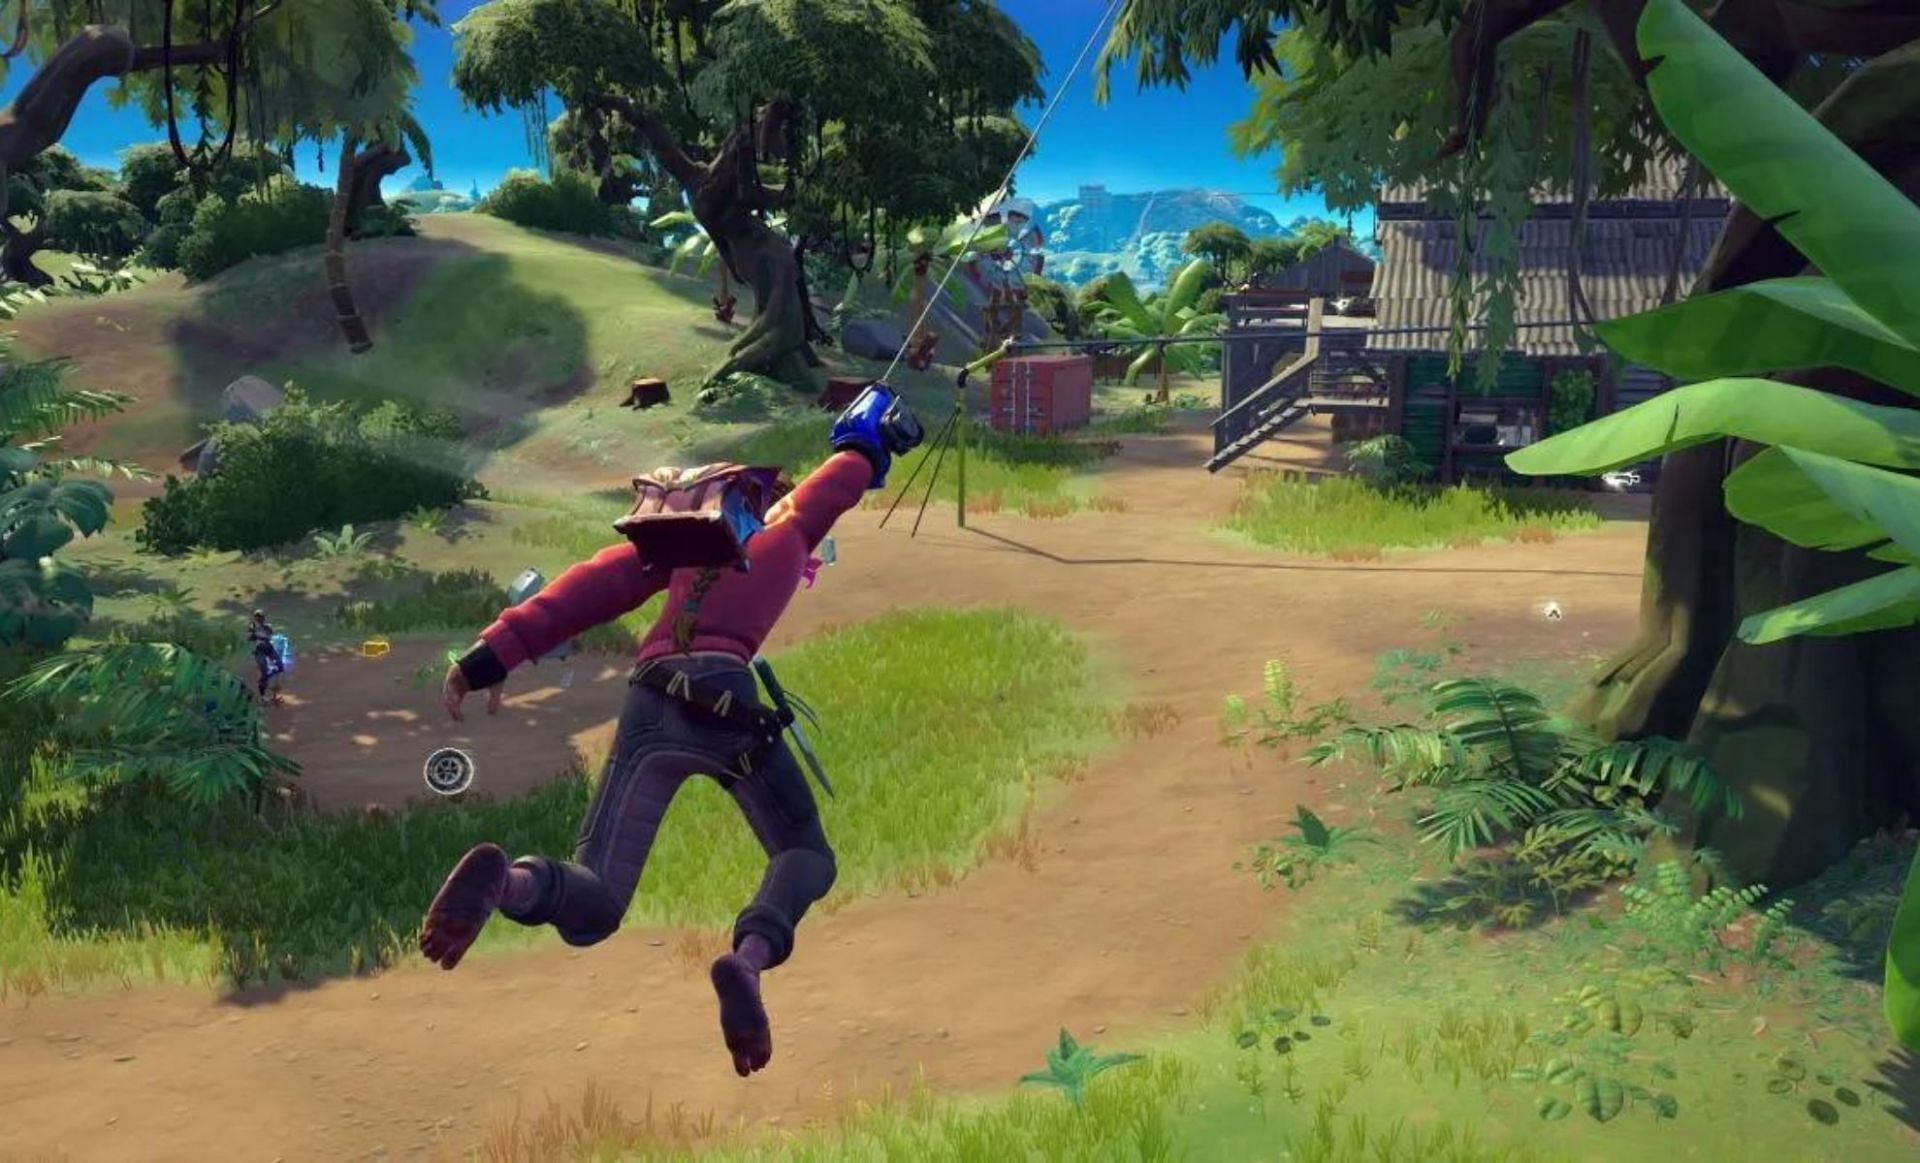 Grapple gloves swing players around (Image via Epic Games)